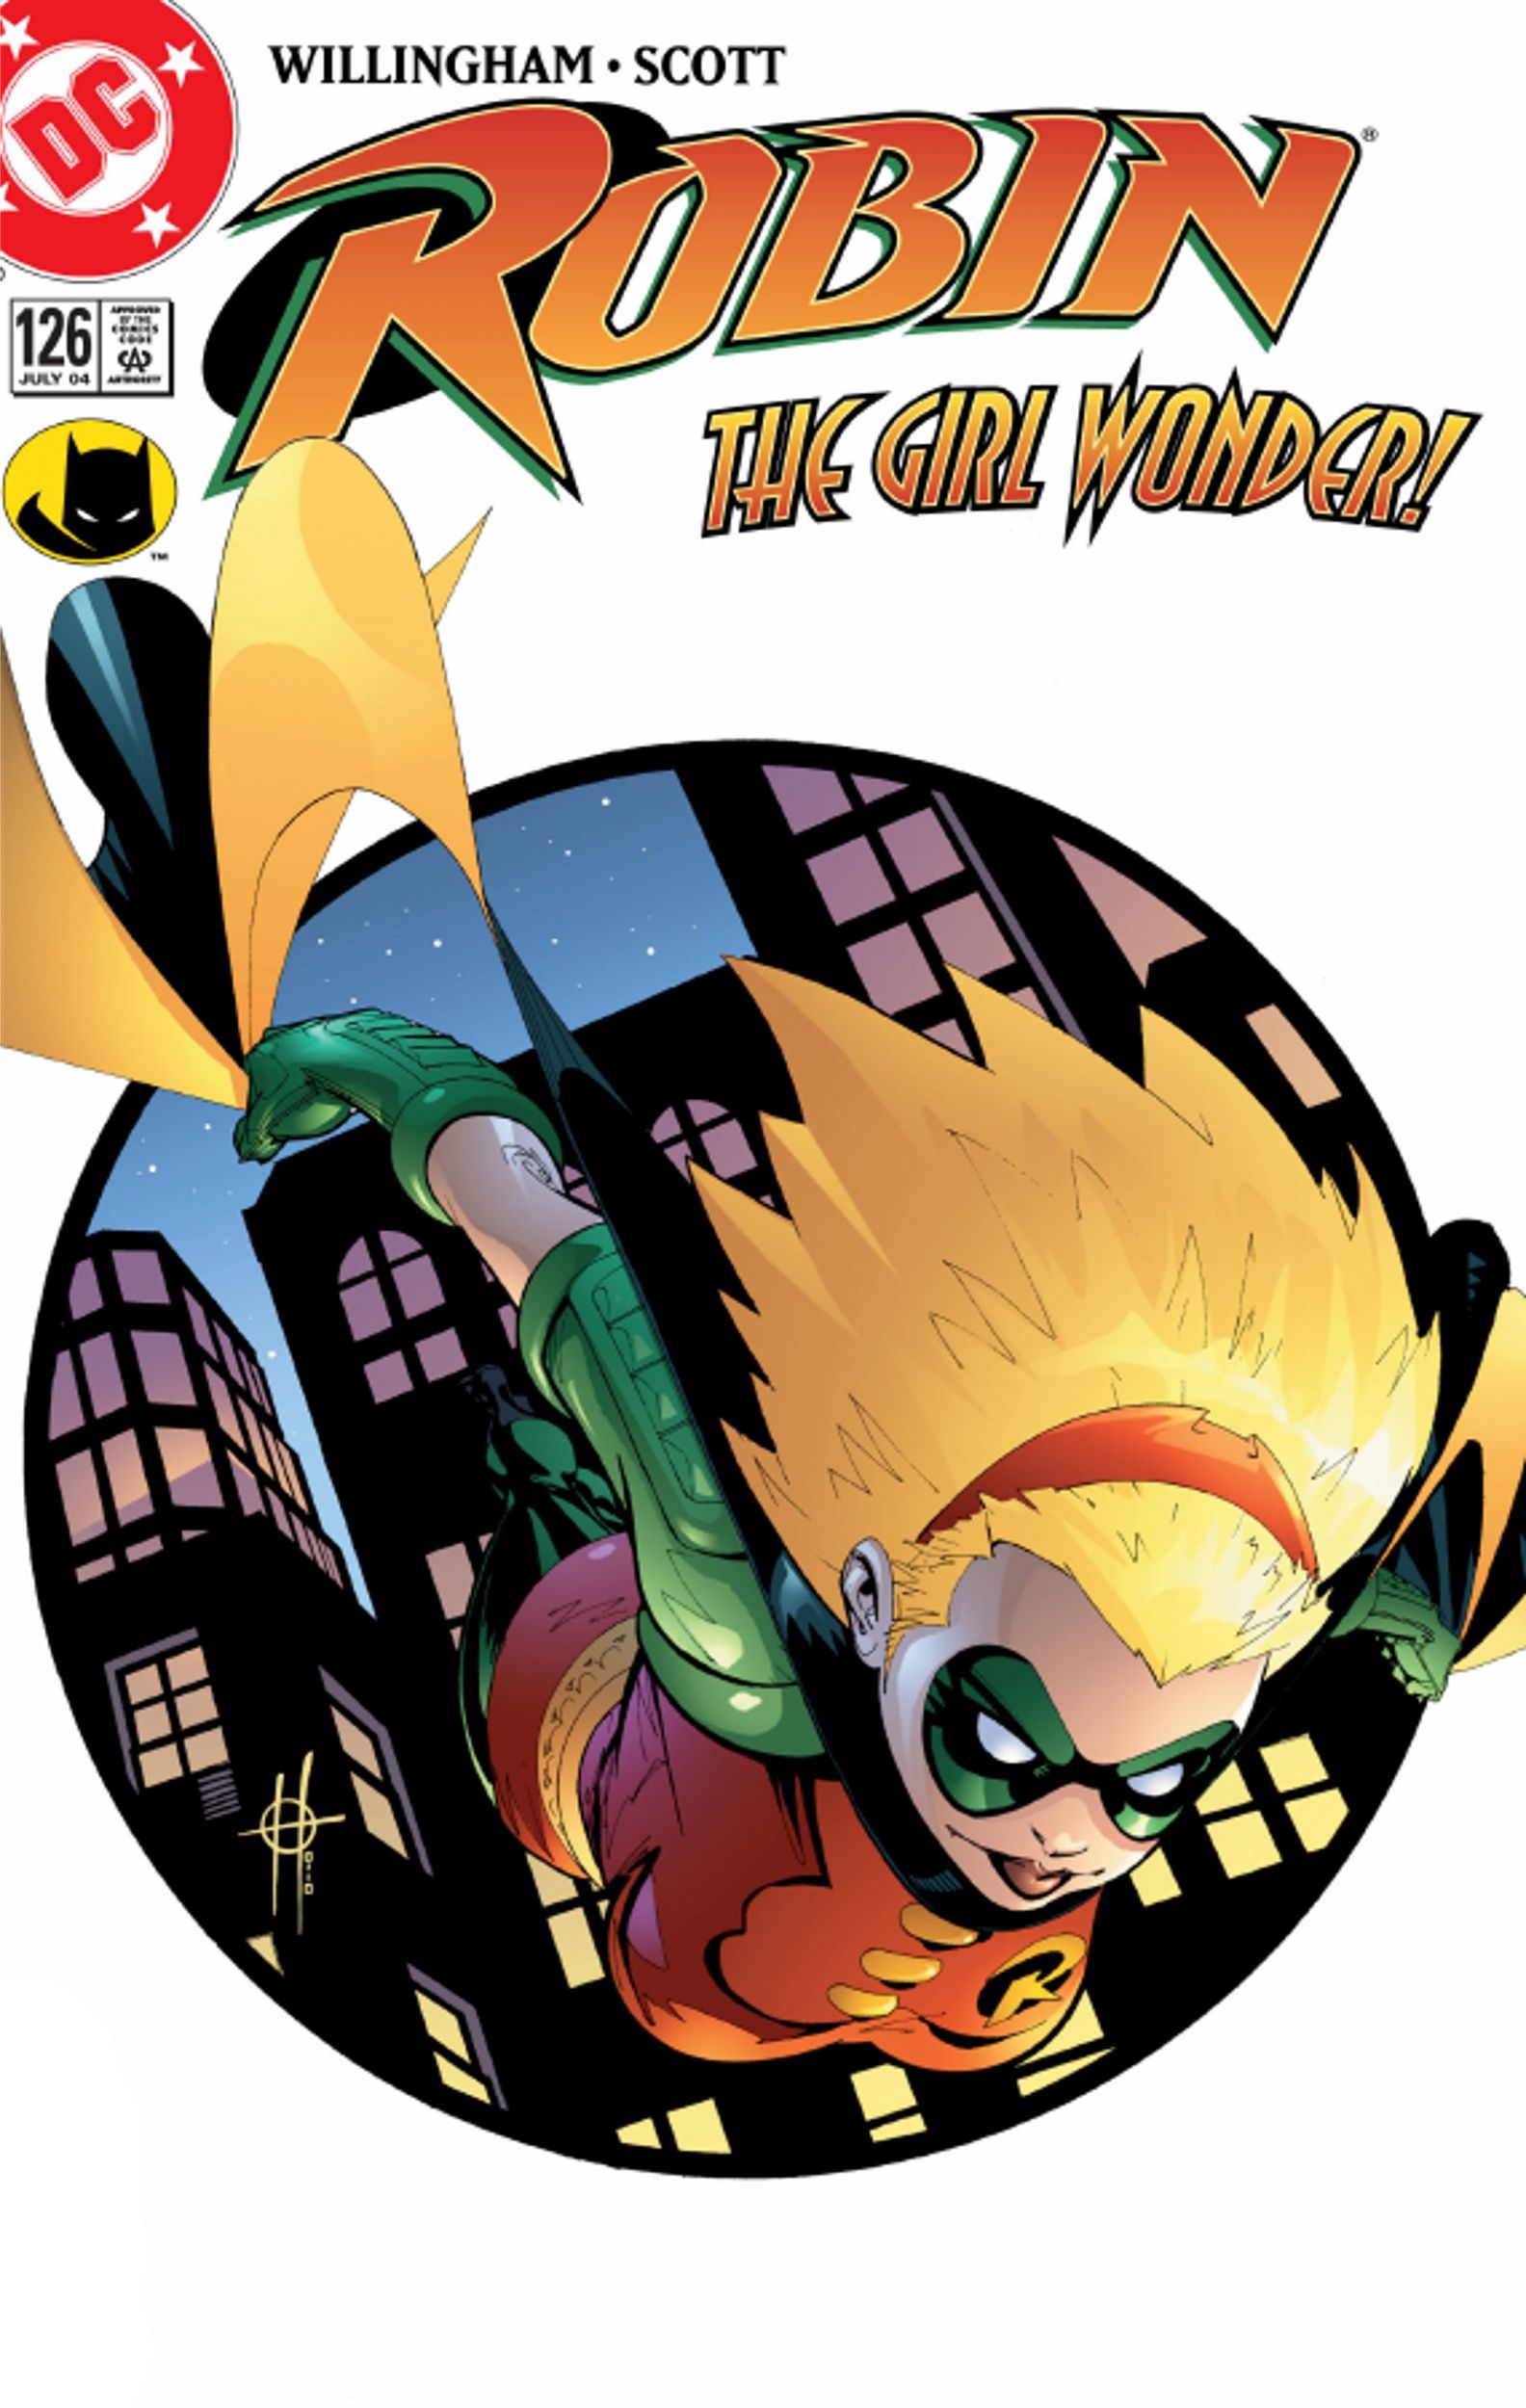 Robin #126, cover art by Damion Scott and Guy Major